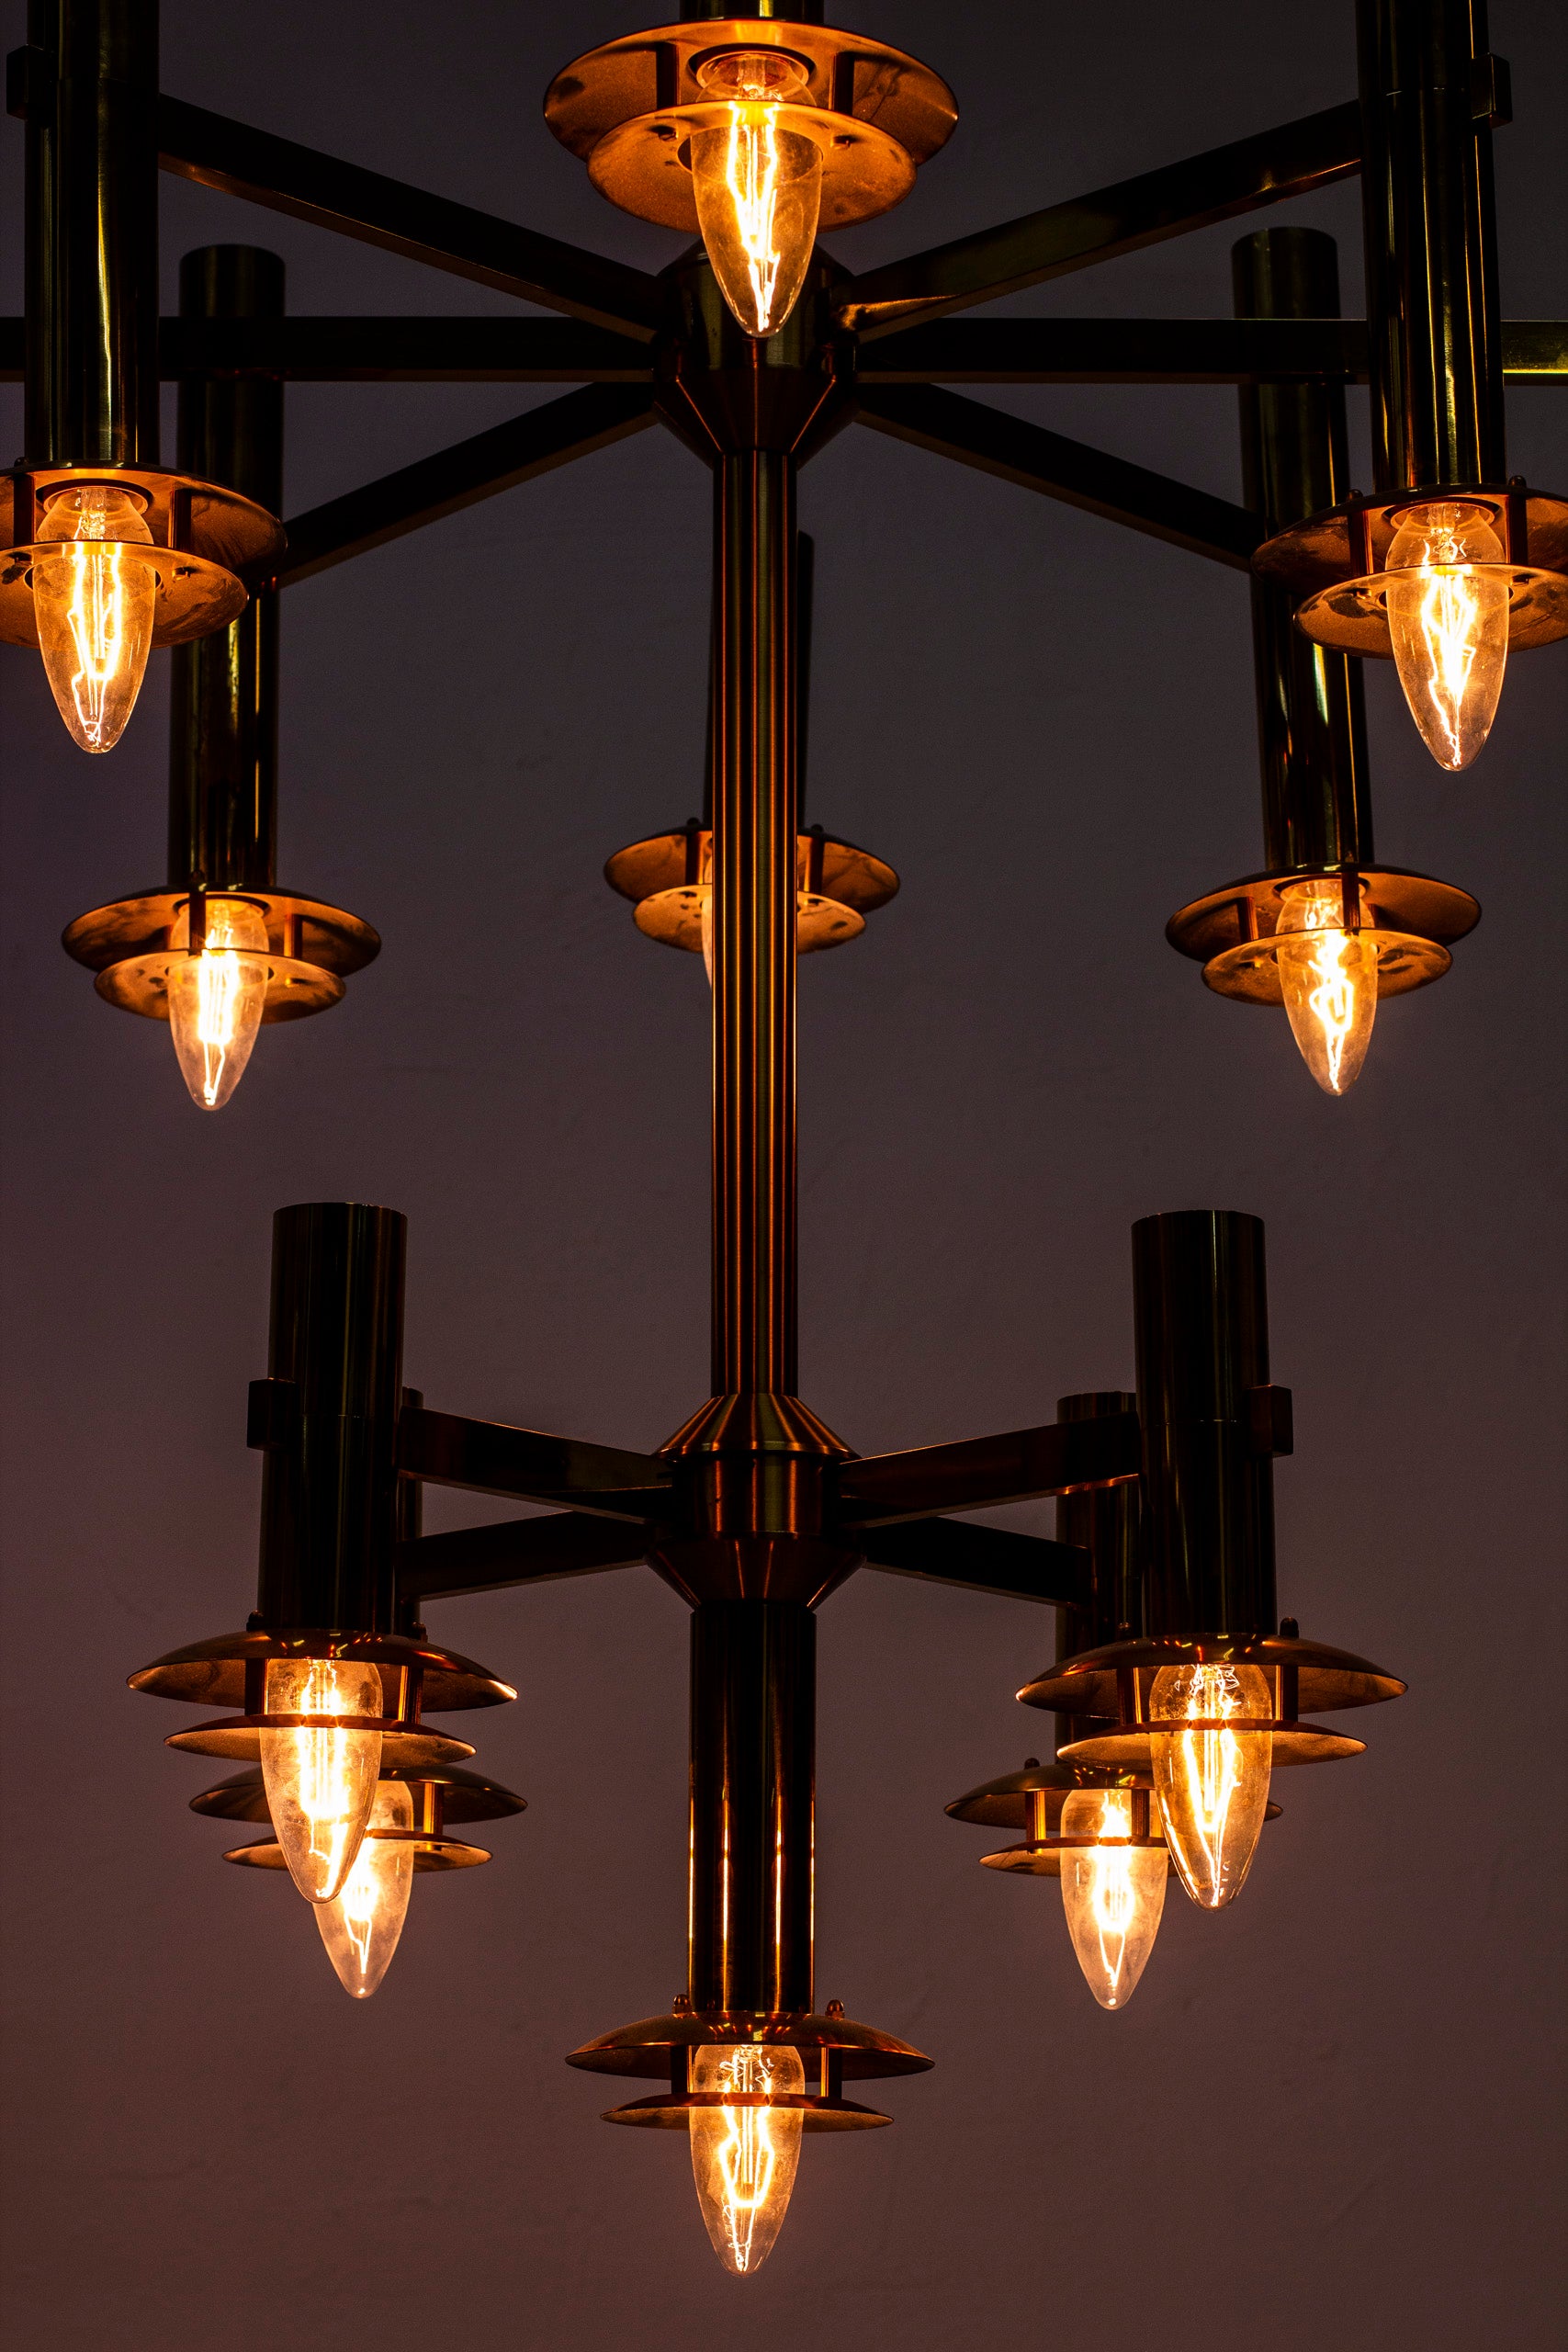 Chandeliers by Holger Johansson